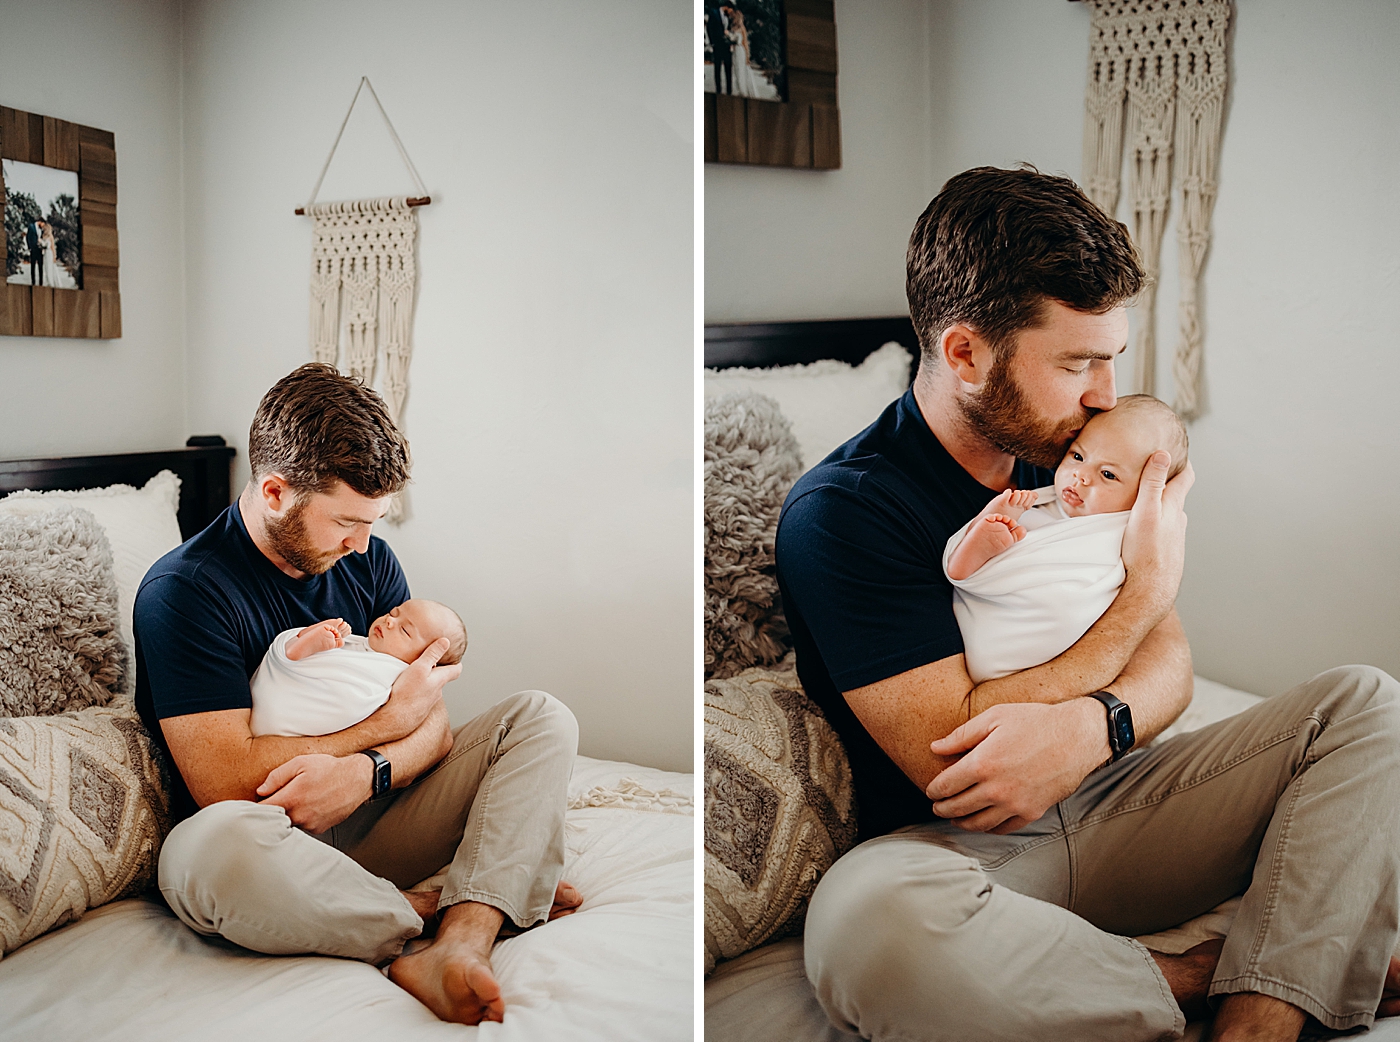 Dad cradling baby in his arms sitting crisscross on the bed South Florida Newborn Photography captured by South Florida Family Photographer Maggie Alvarez Photography